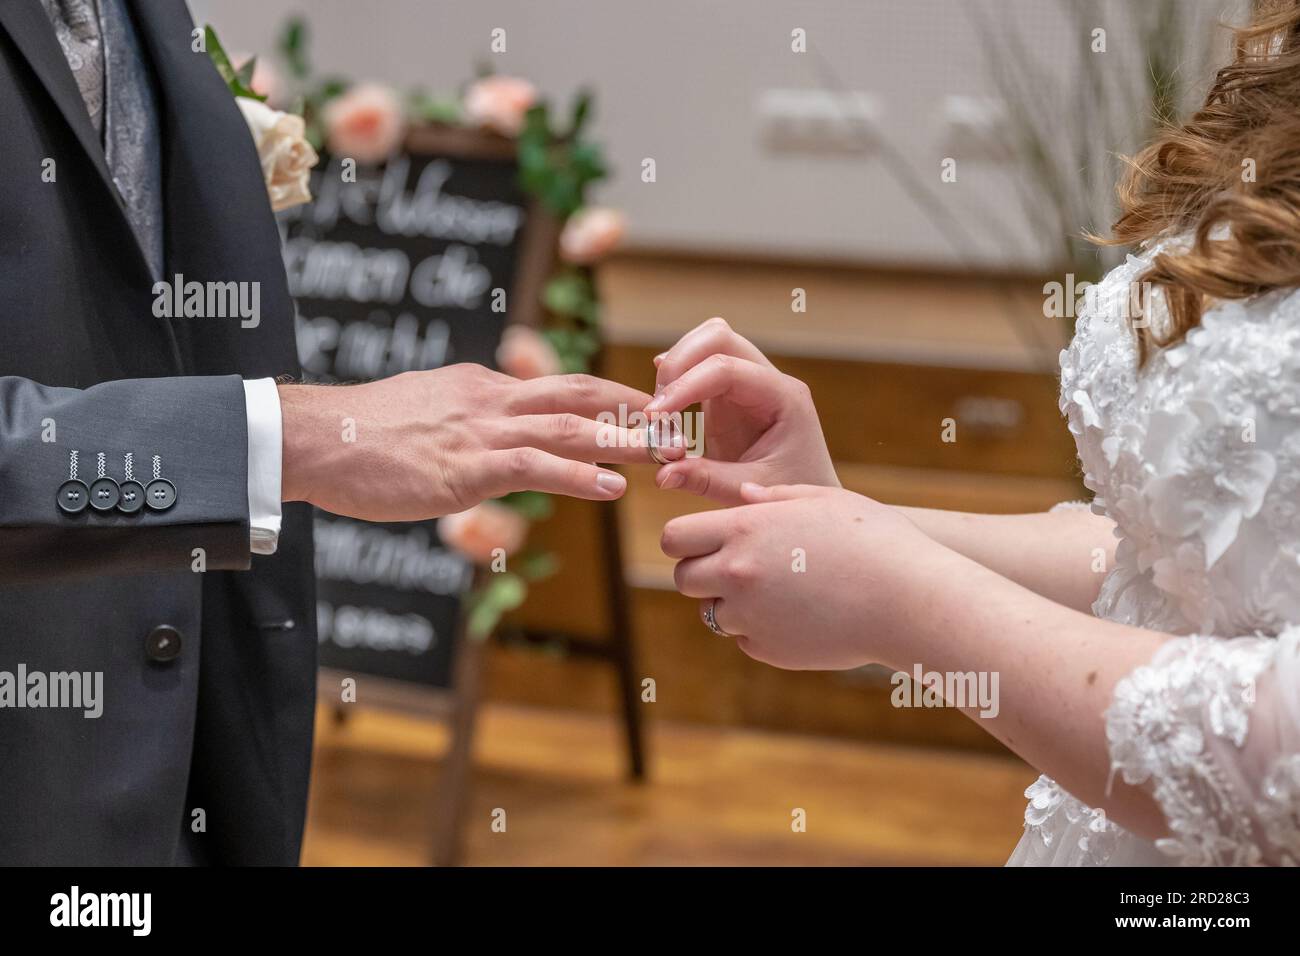 wedding rings and hands of bride and groom ring exchange couple at ceremony in love 2RD28C3